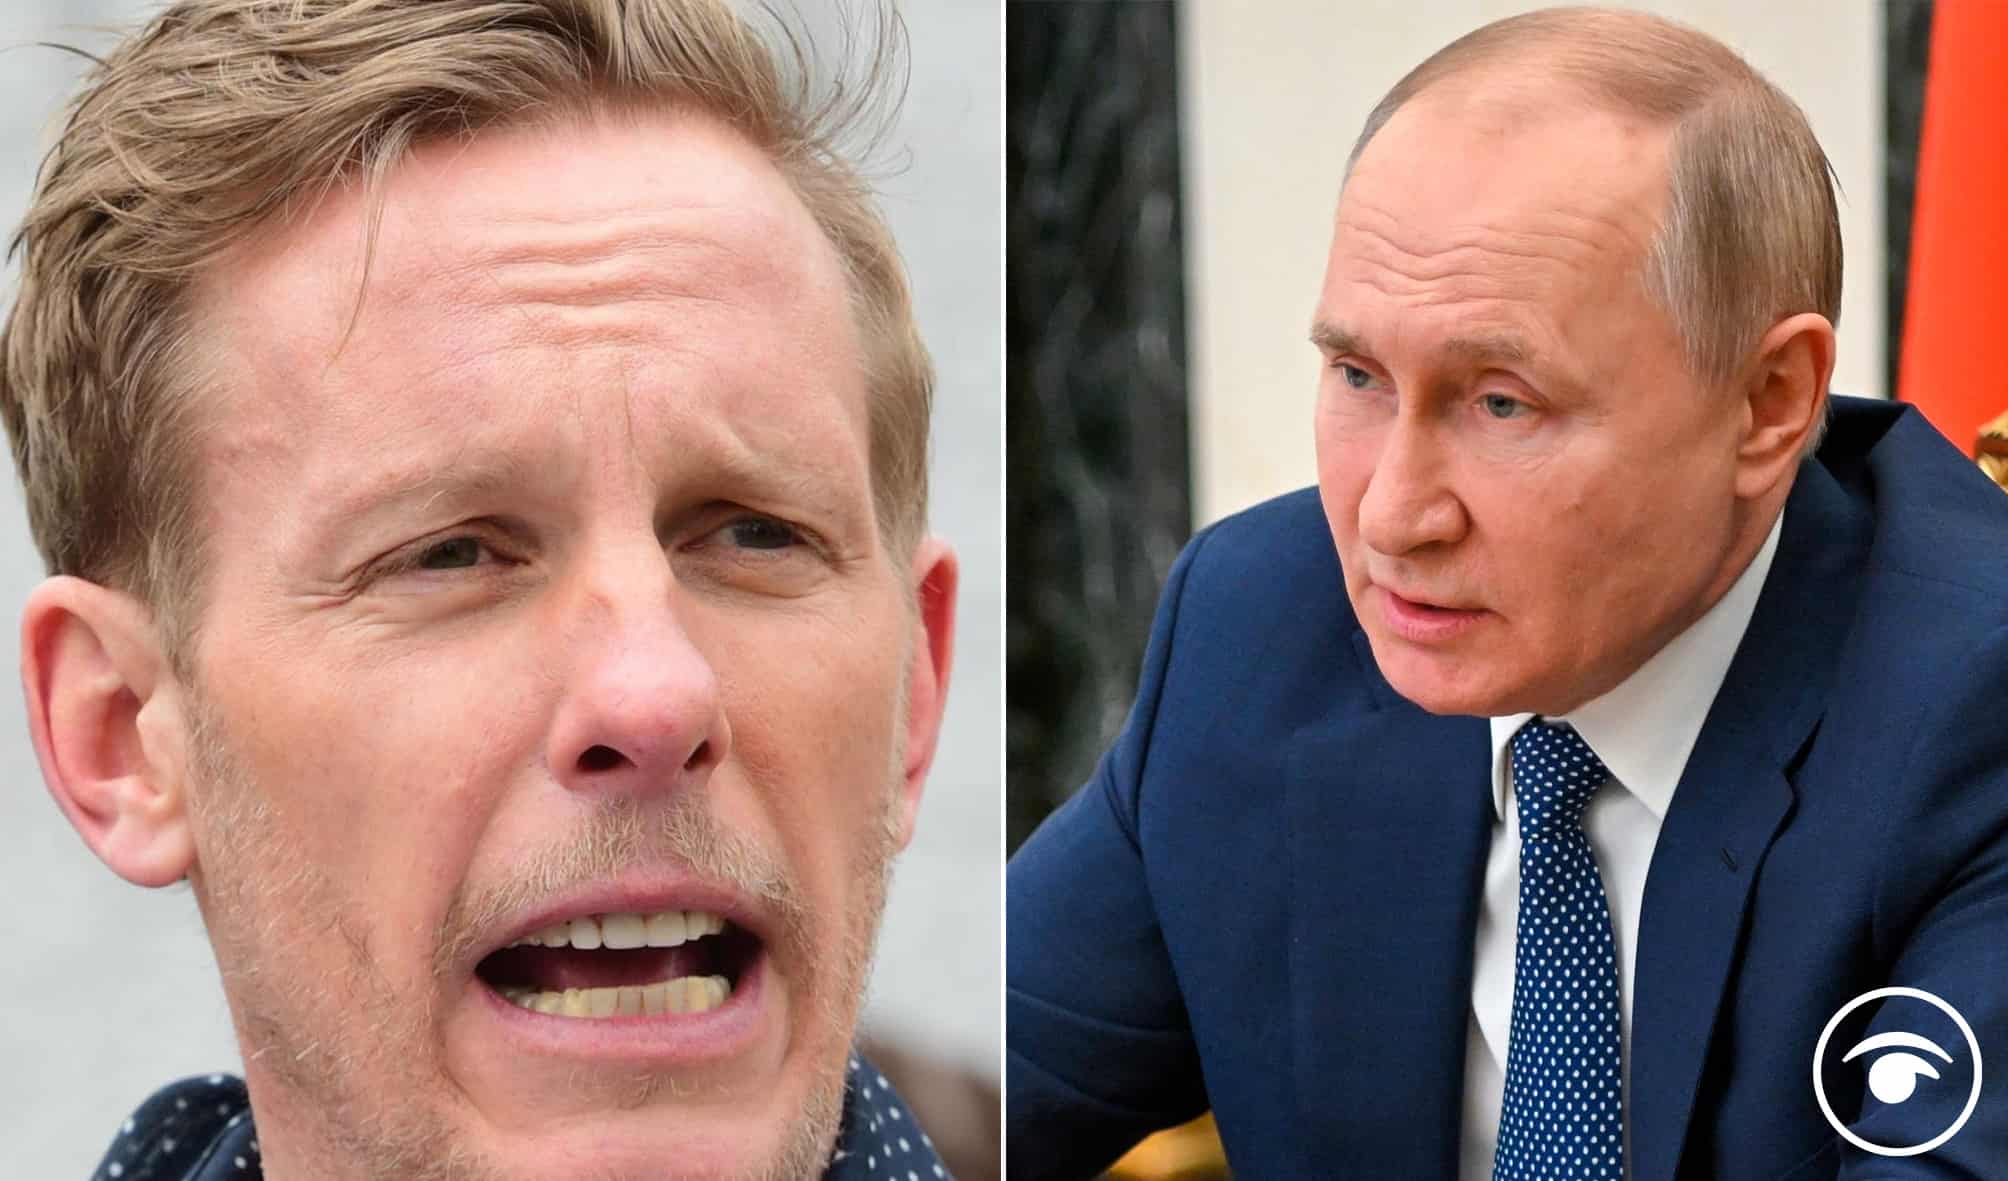 Reactions as Laurence Fox says attitudes towards Putin ‘devoid of nuance or debate’